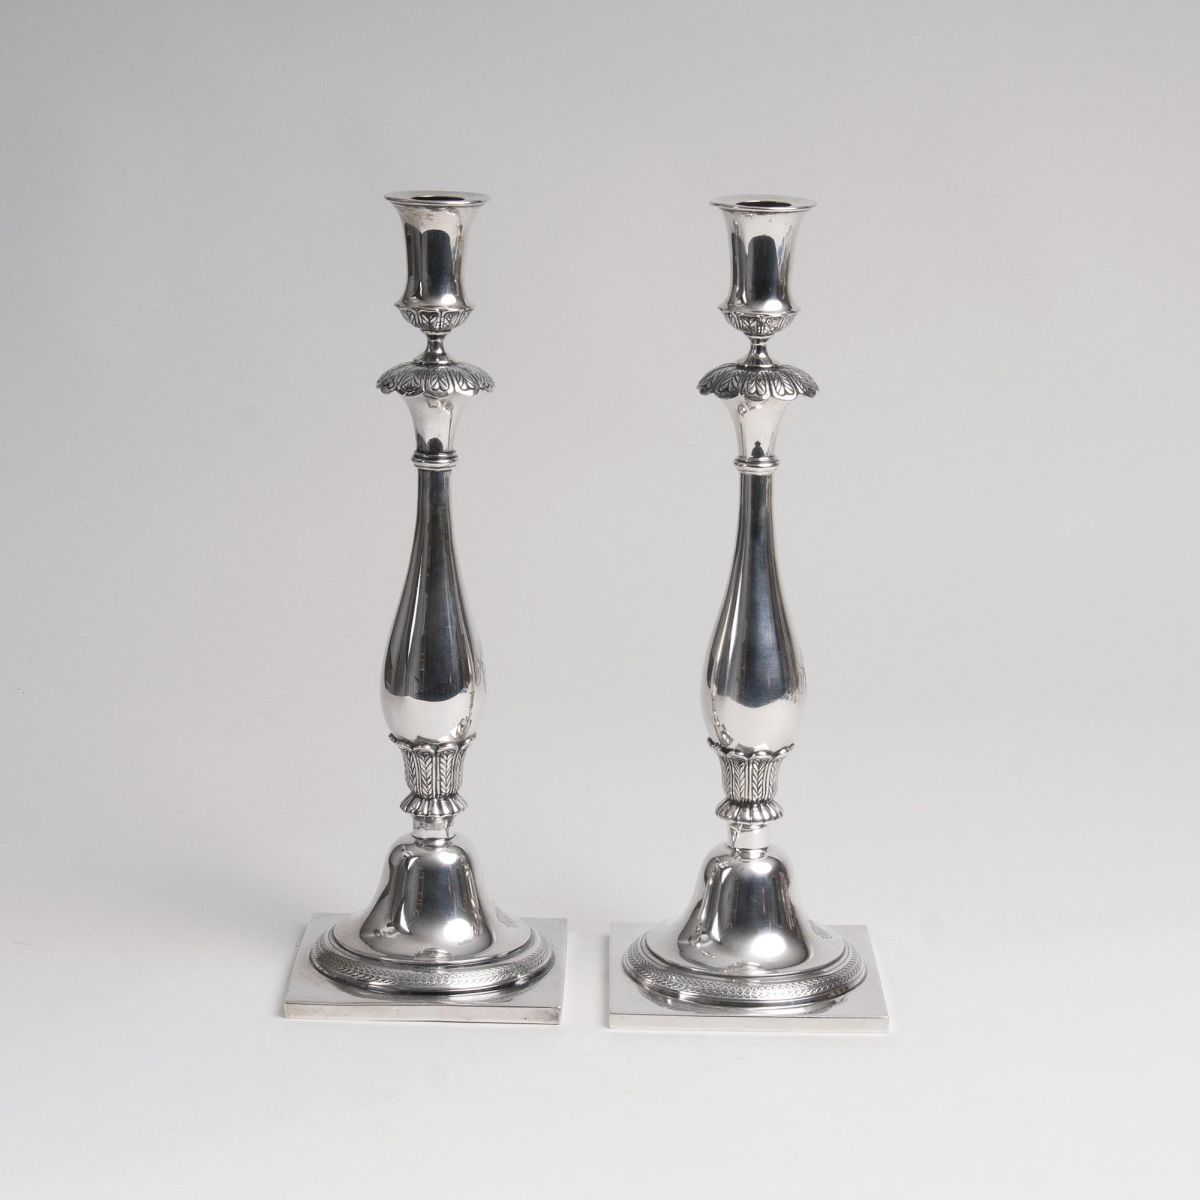 A Pair of Empire-Style Candle Holders